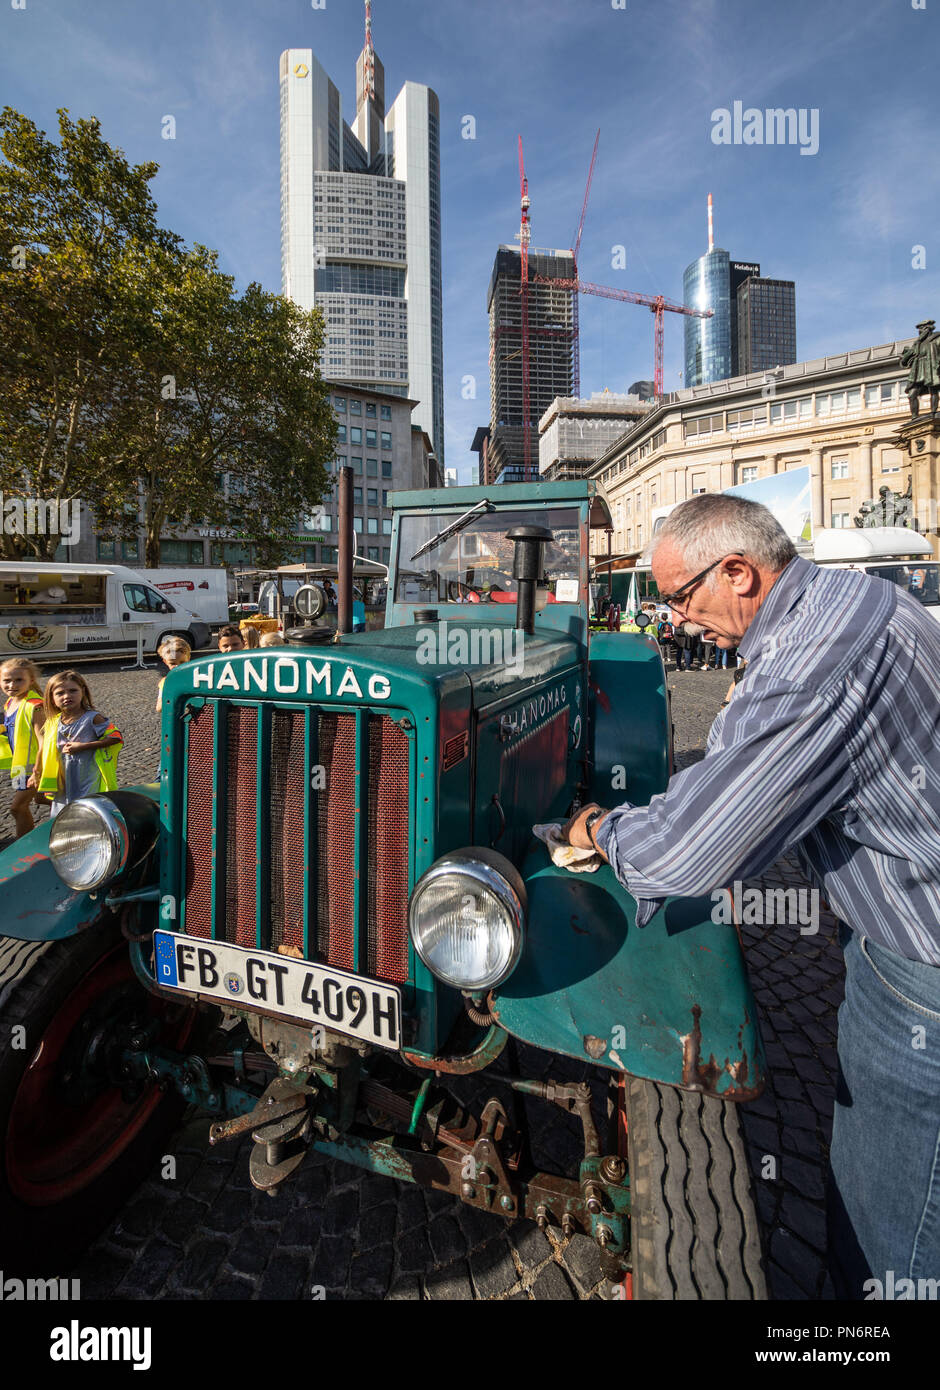 20 September 2018, Hessen, Frankfurt Main: Rüdiger Witzel, chairman of the vintage car association for historic agricultural machinery from Hungen, cleans his 1948 Hanomag R40 in front of the skyscraper backdrop at the 35th Frankfurt Harvest Festival in the city centre. The aim of the event is to bring agriculture and rural life closer to the urban population. Photo: Frank Rumpenhorst/dpa Stock Photo